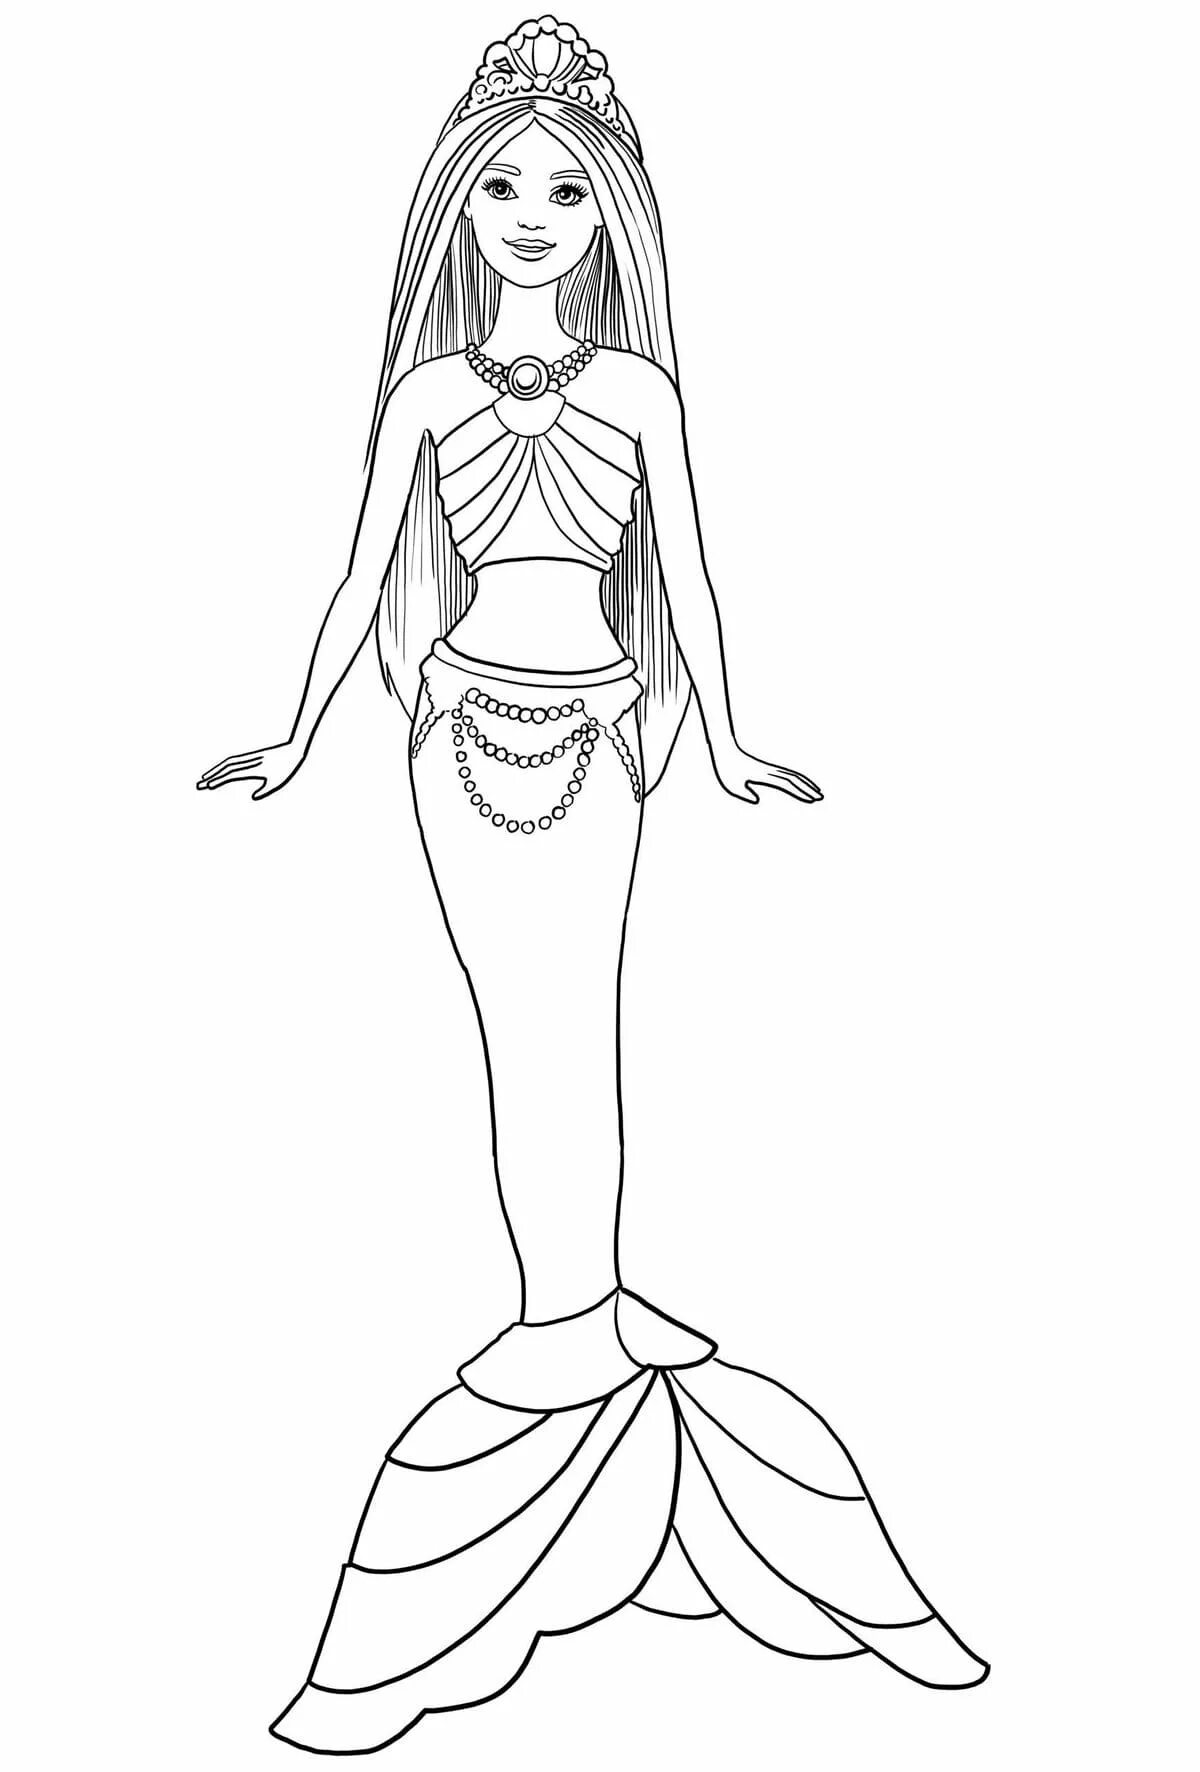 Glittering mermaid queen coloring page